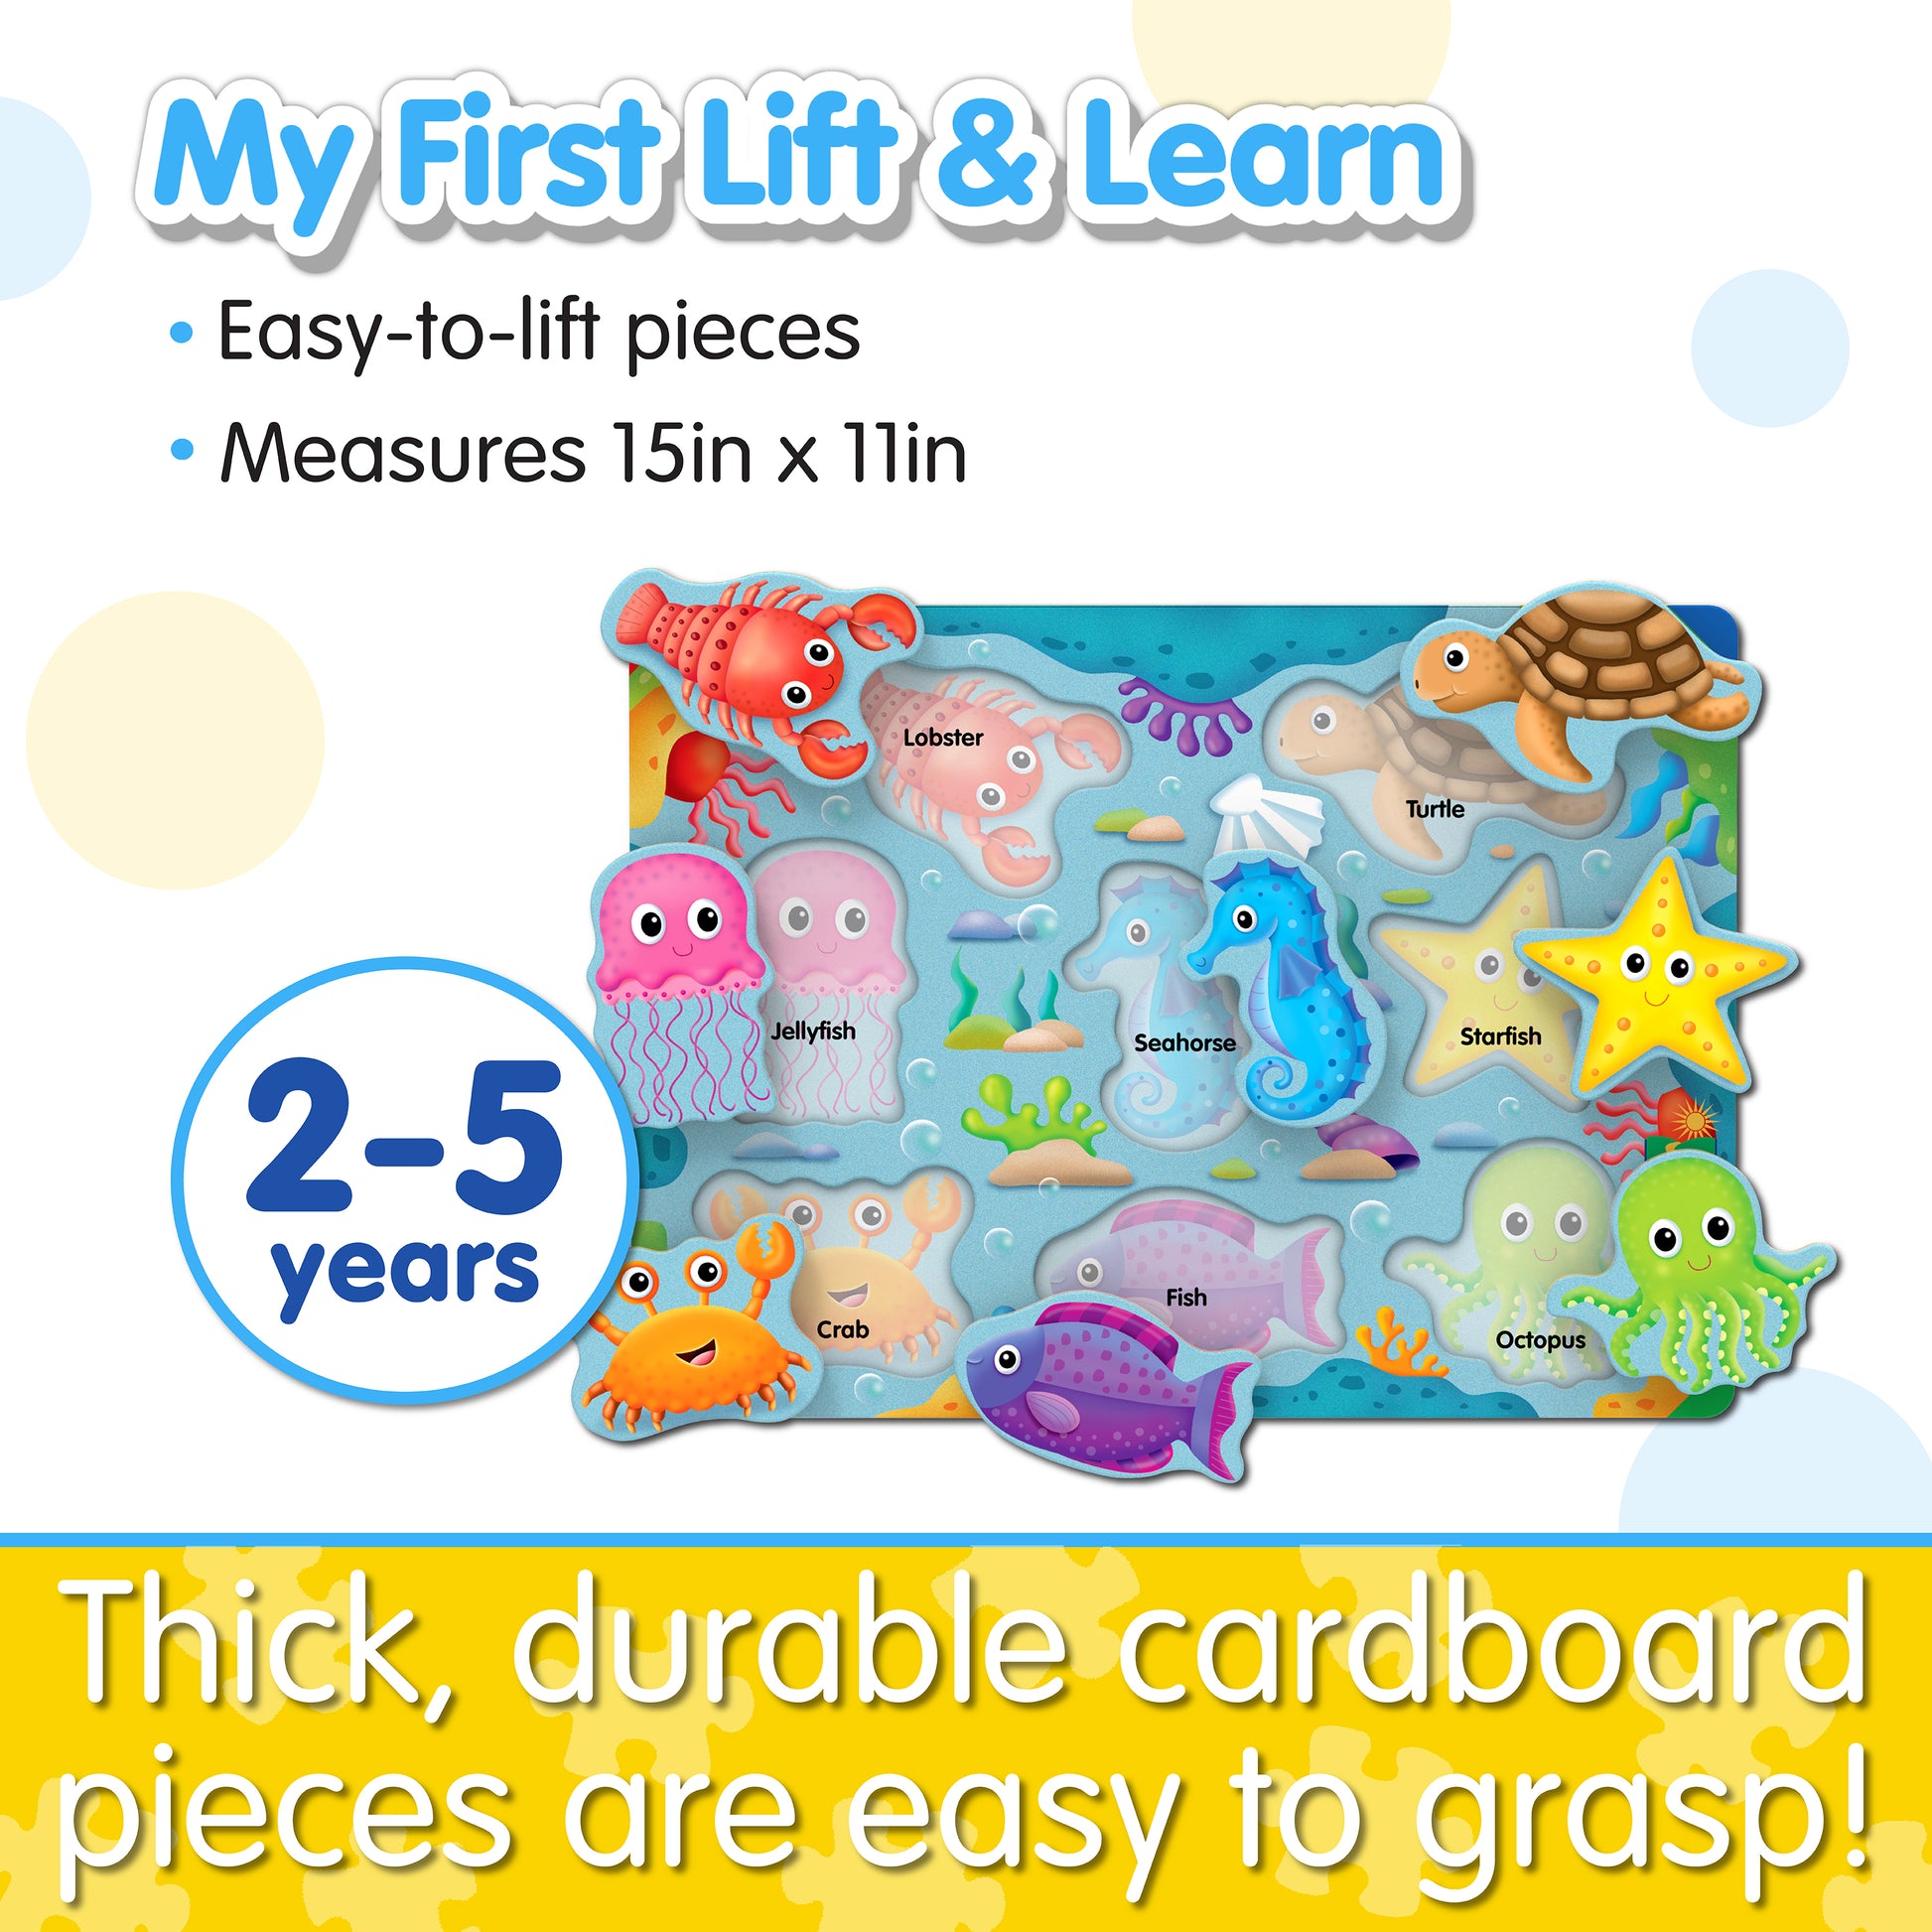 Infographic about My First Lift and Learn Under the Sea Puzzle's features that says, "Thick, durable cardboard pieces are easy to grasp!"